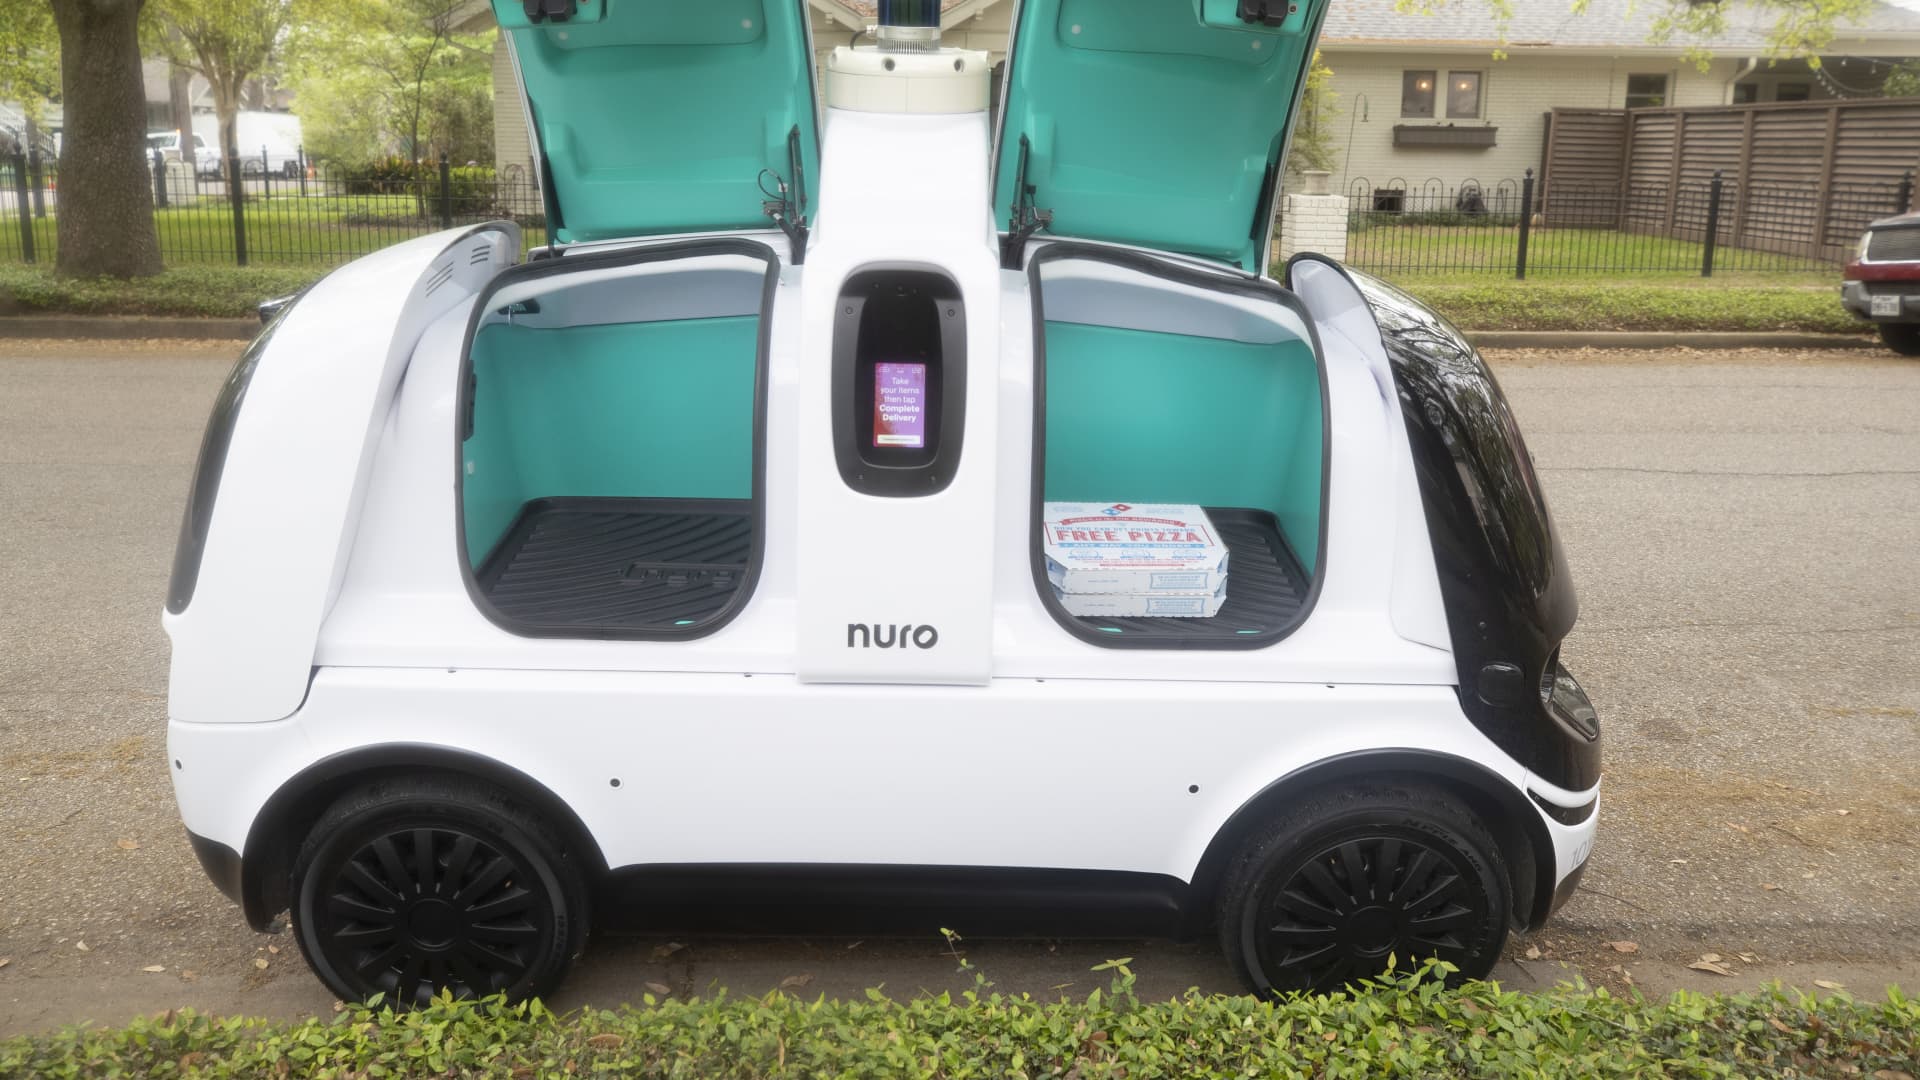 Domino's tests Nuro, an autonomous car for pizza delivery in Houston.